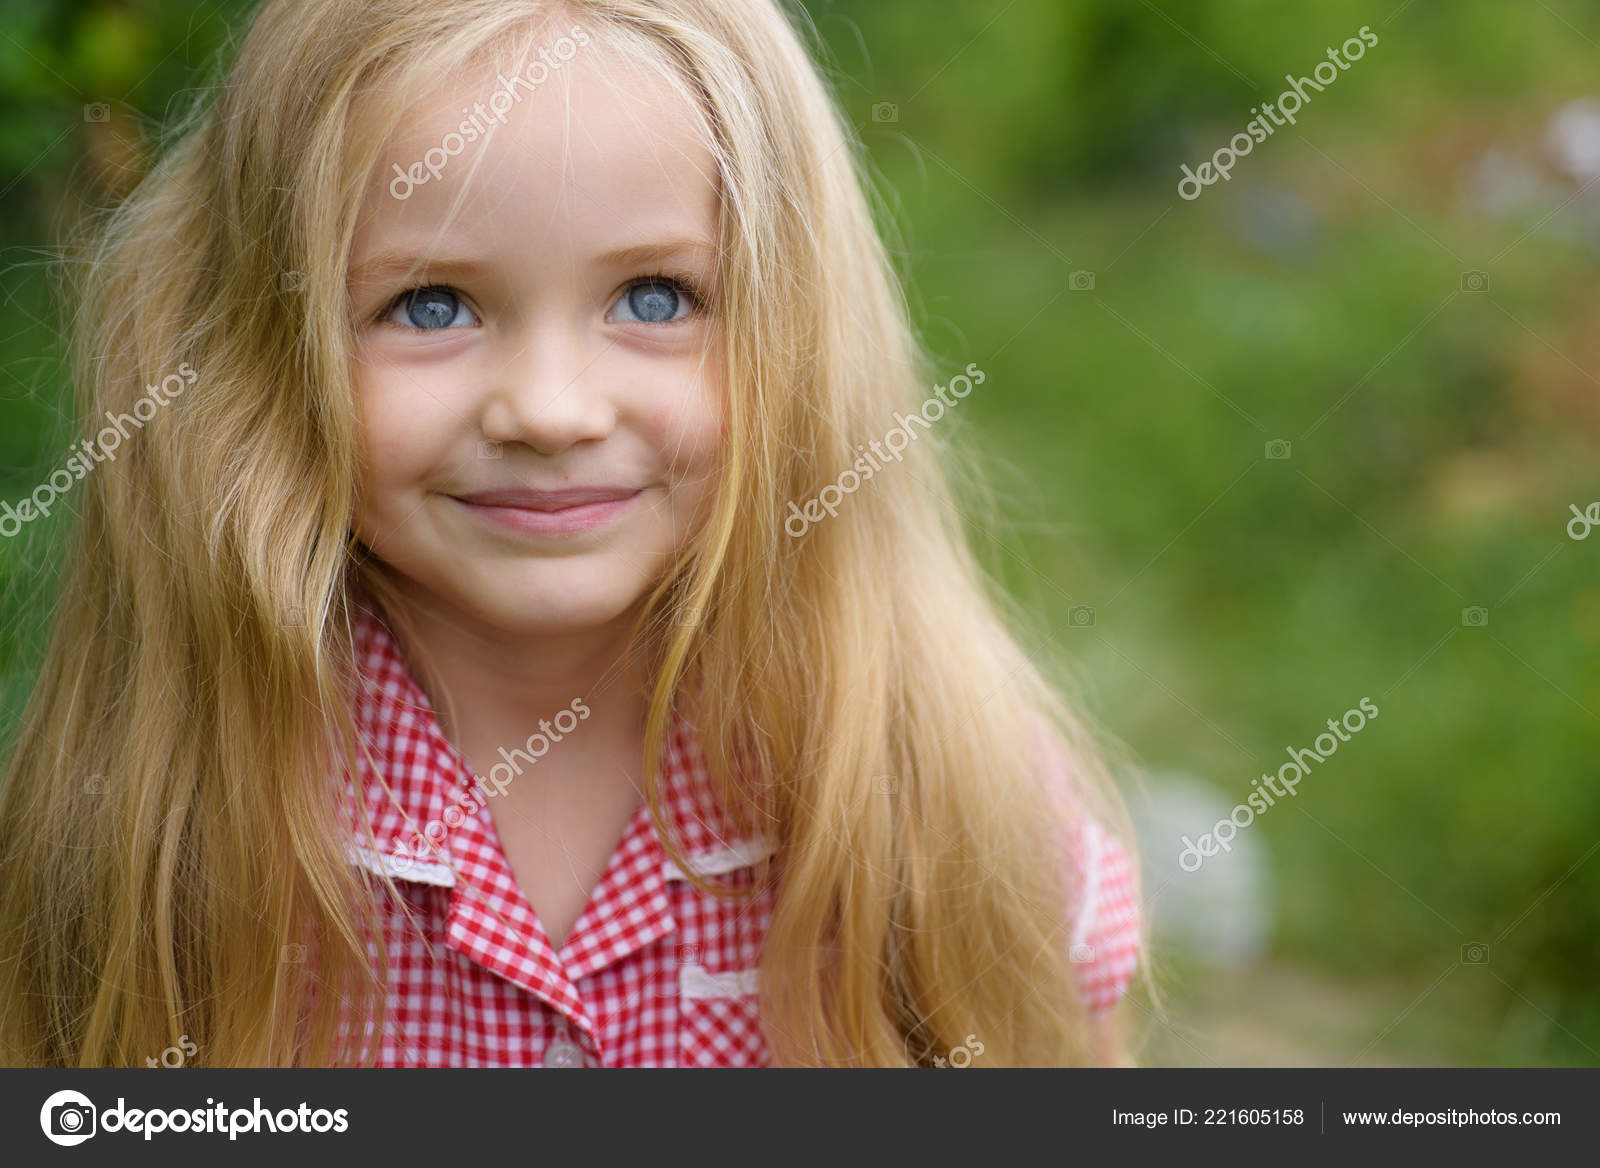 3. "Blonde Teen with Adorable Hairstyle" - wide 7